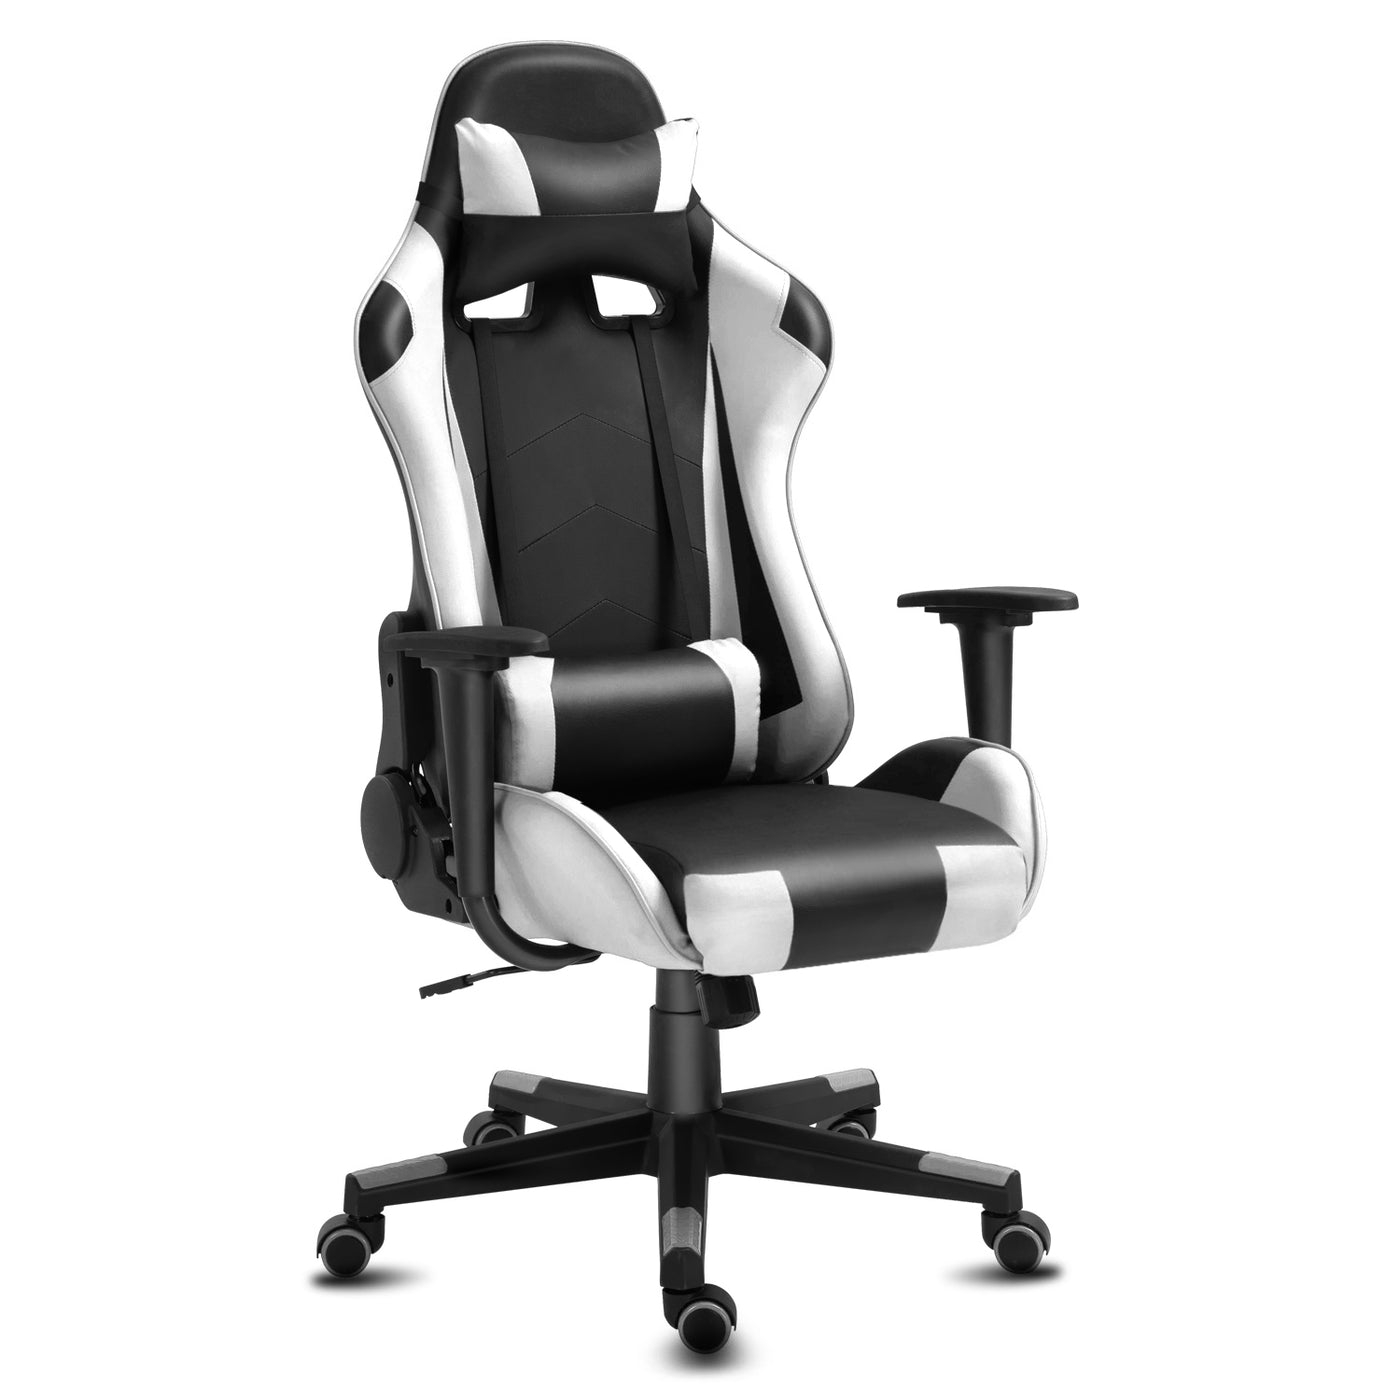 Ergonomic Racing Gaming Chair Swivel Recliner Office Executive Computer Chair